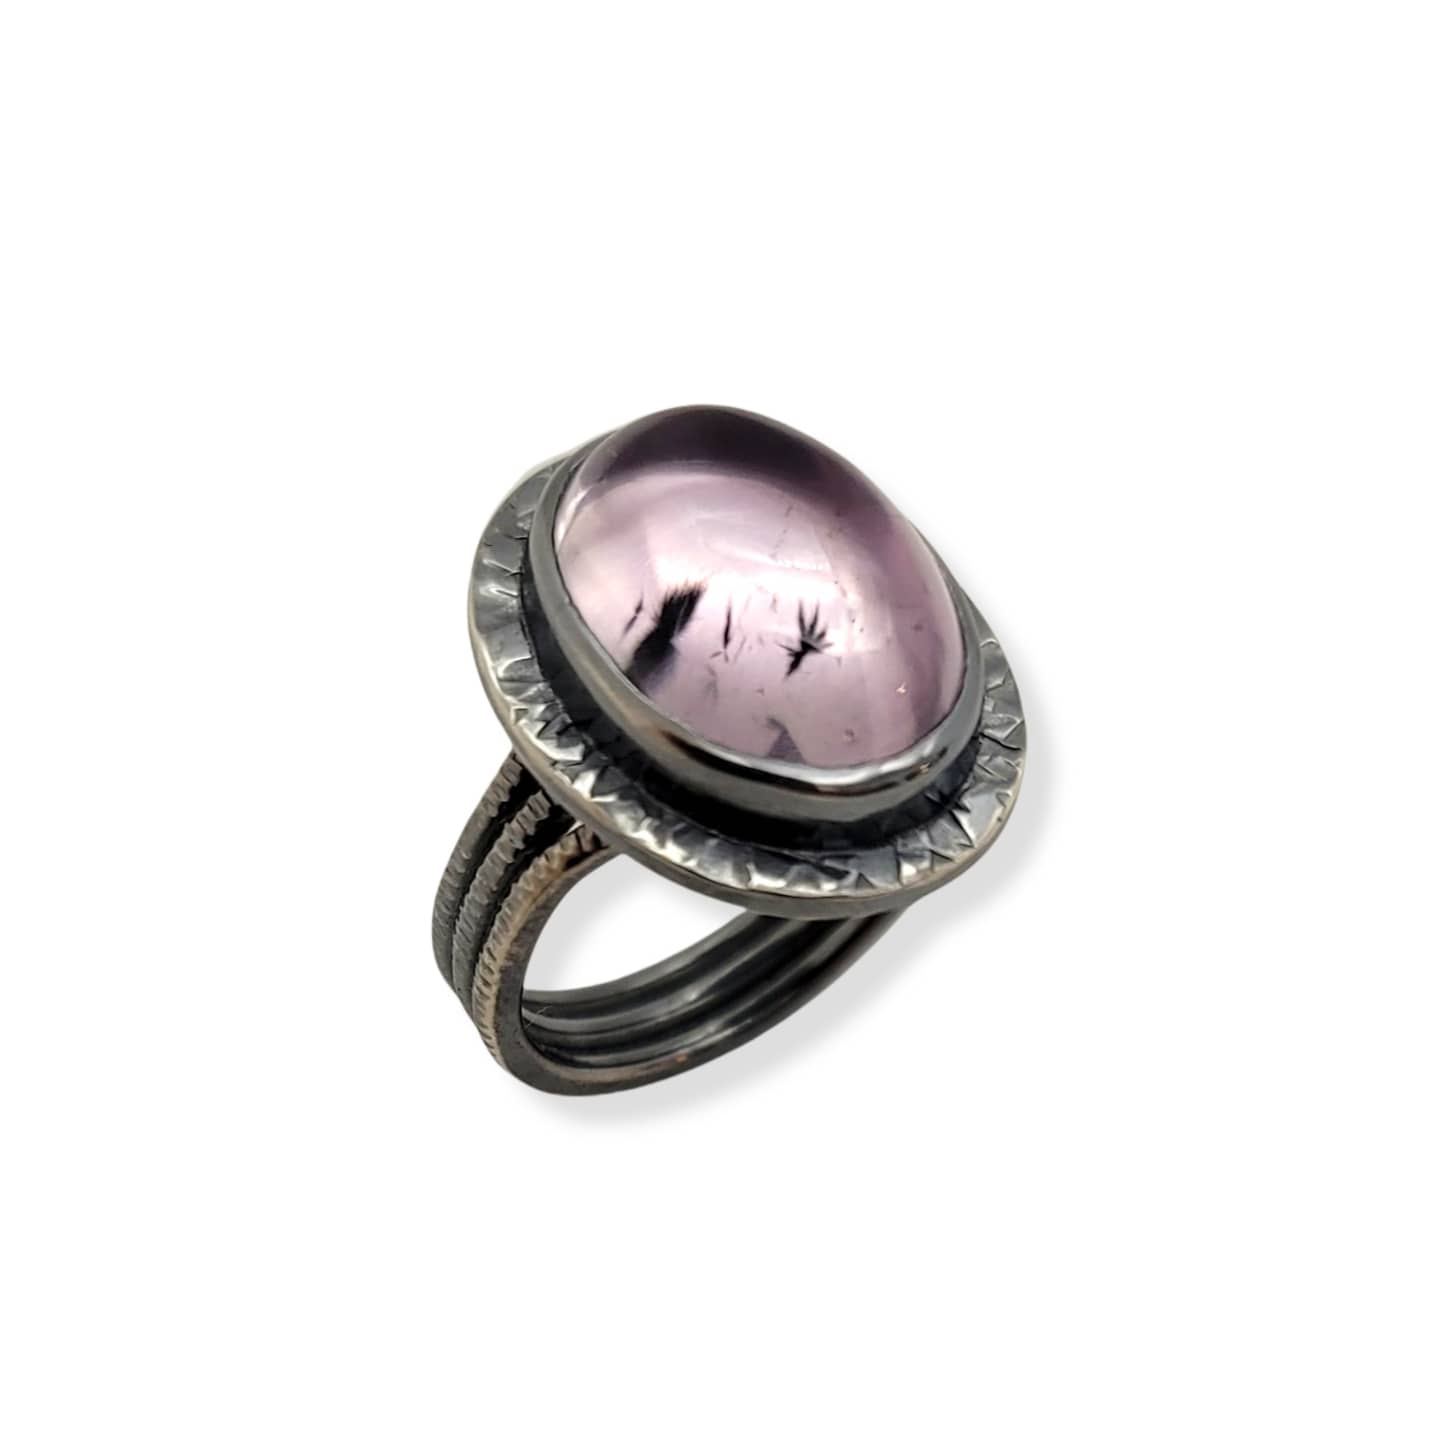 Oxidized Sterling Silver Ring With Hollandite Inclusions in Amethyst.